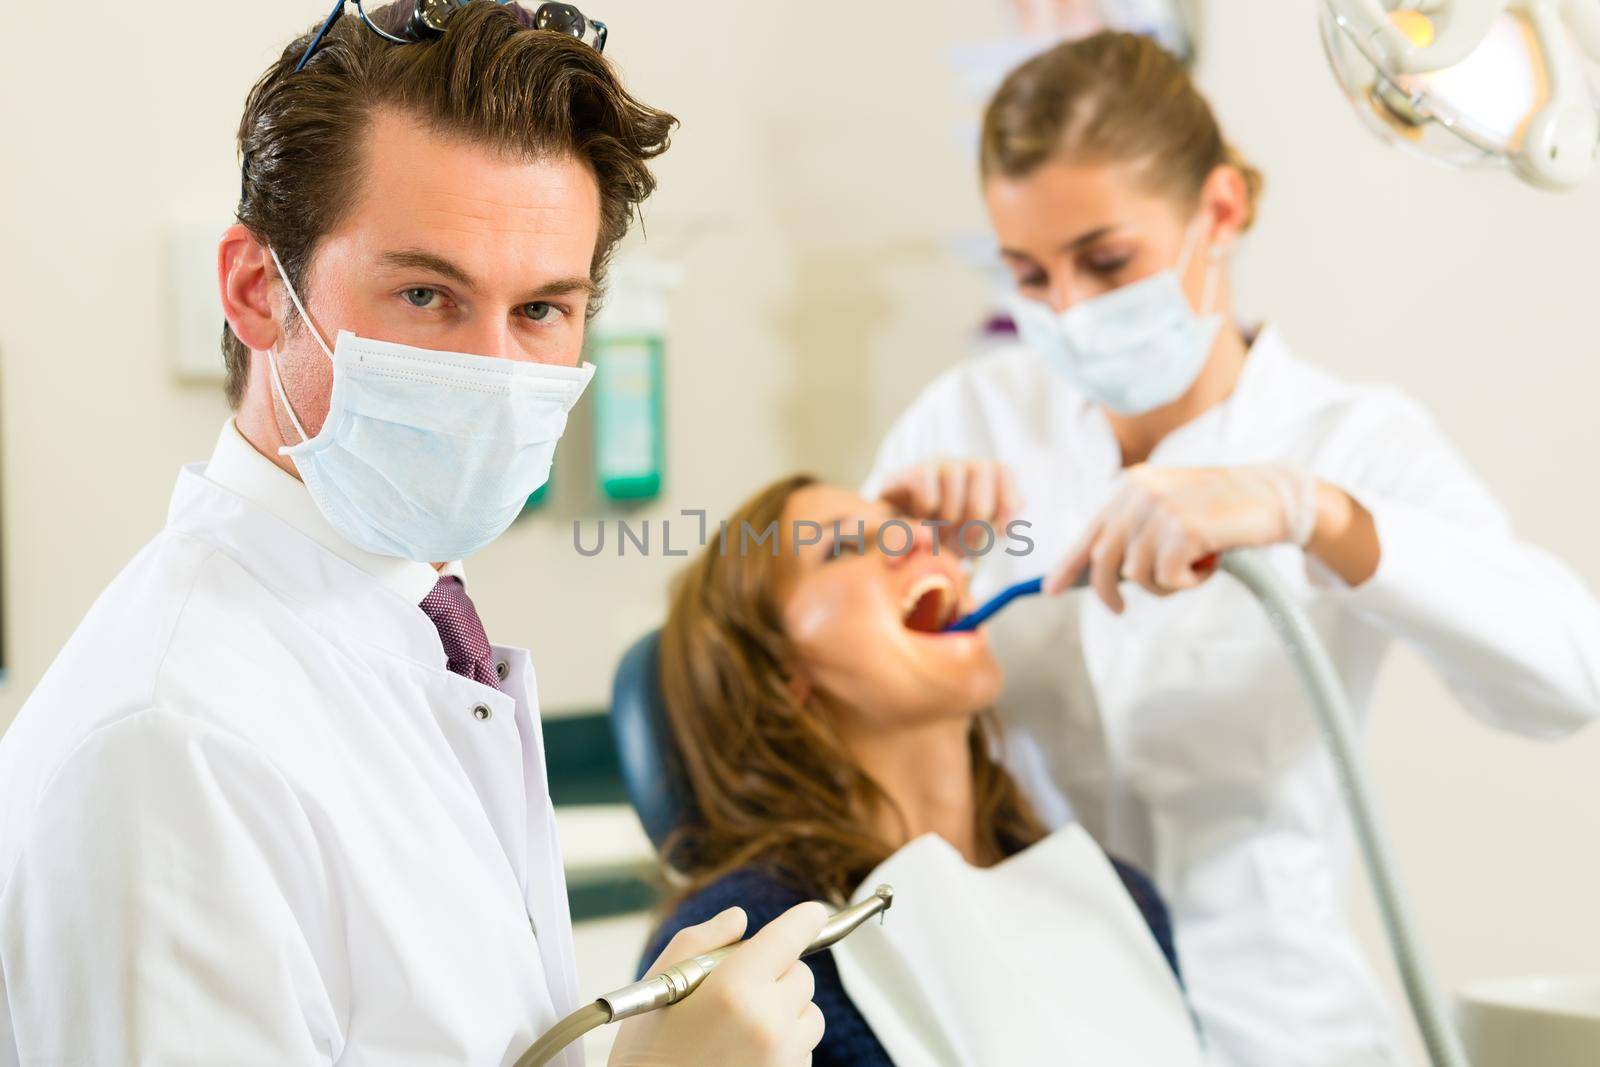 Dentists in his surgery looking at the viewer, in the background his assistant is giving a female patient a treatment